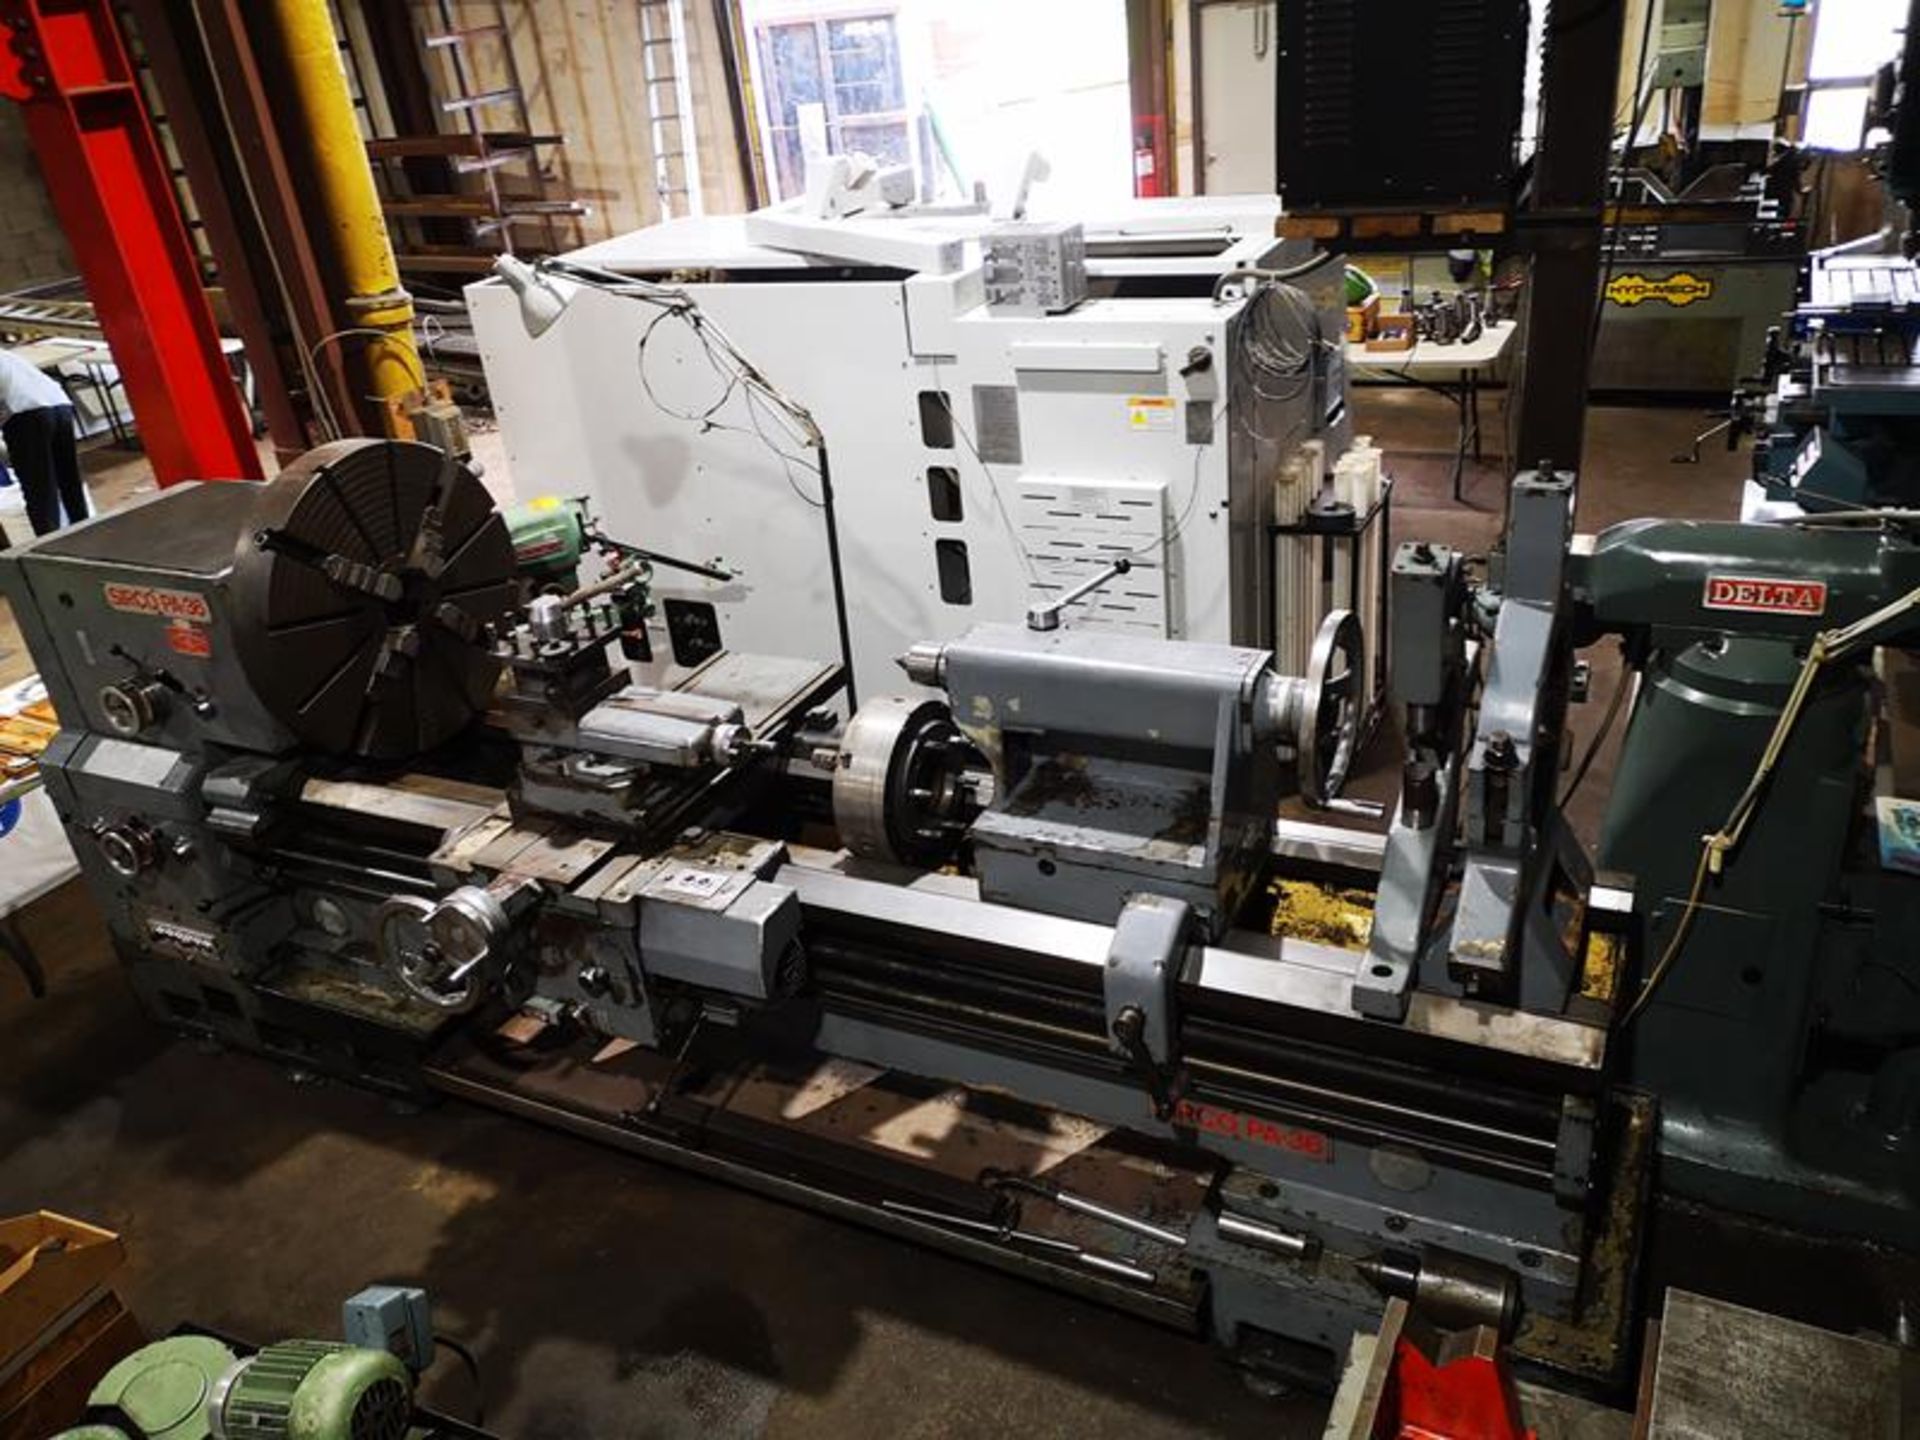 CNC VMCS, LATHES, WATERJET, SAWS, BRAKES, SHEARS, ROLLS, MOBILE CRANE, IRONWORKERS, VEHICLES, RAW - Image 38 of 41